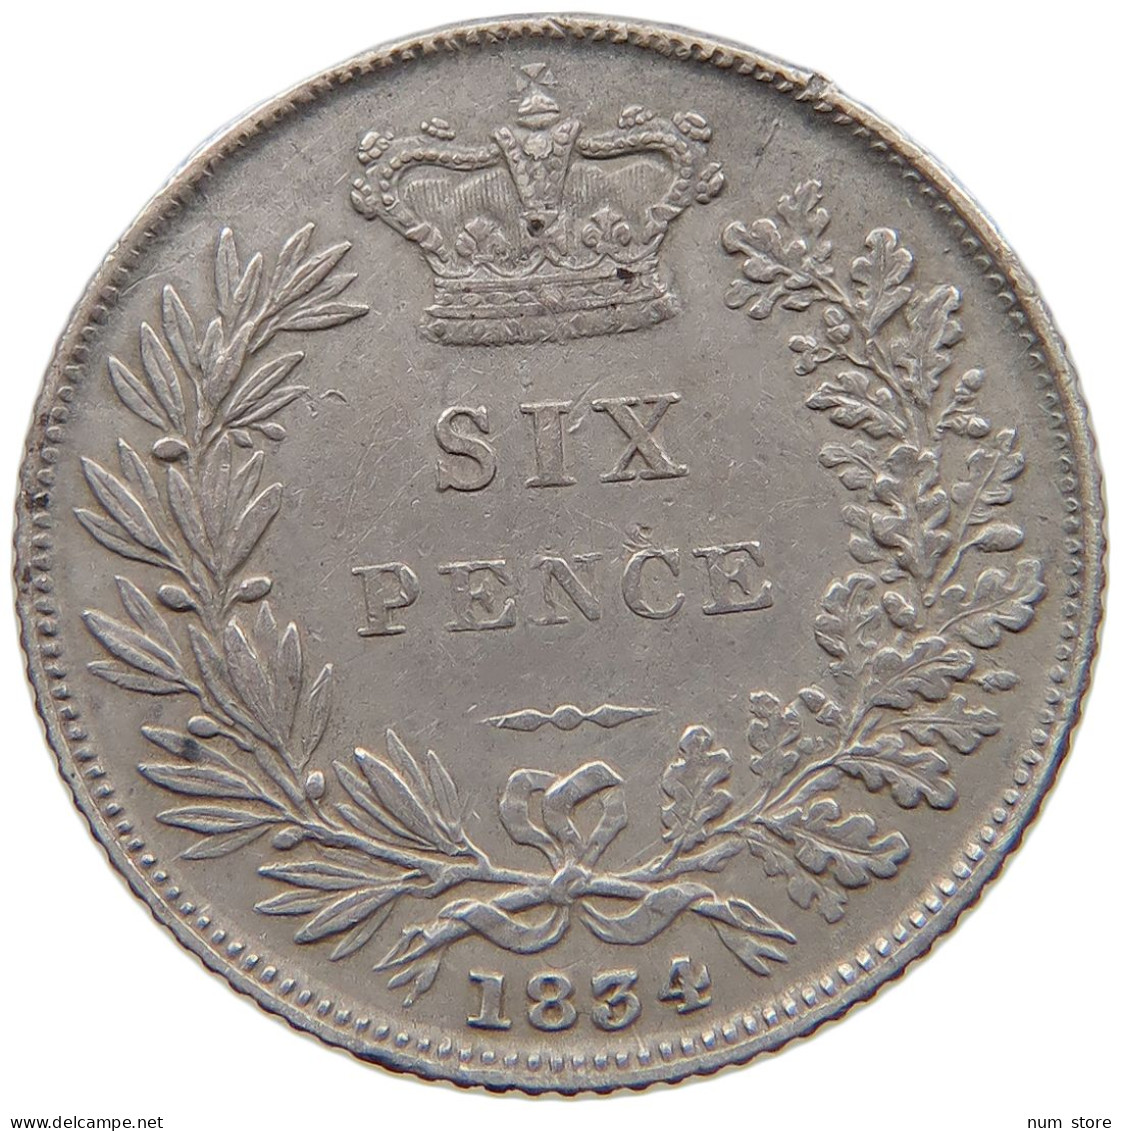 GREAT BRITAIN SIXPENCE 1834 WILLIAM IV. (1830-1837) #t158 0399 - H. 6 Pence